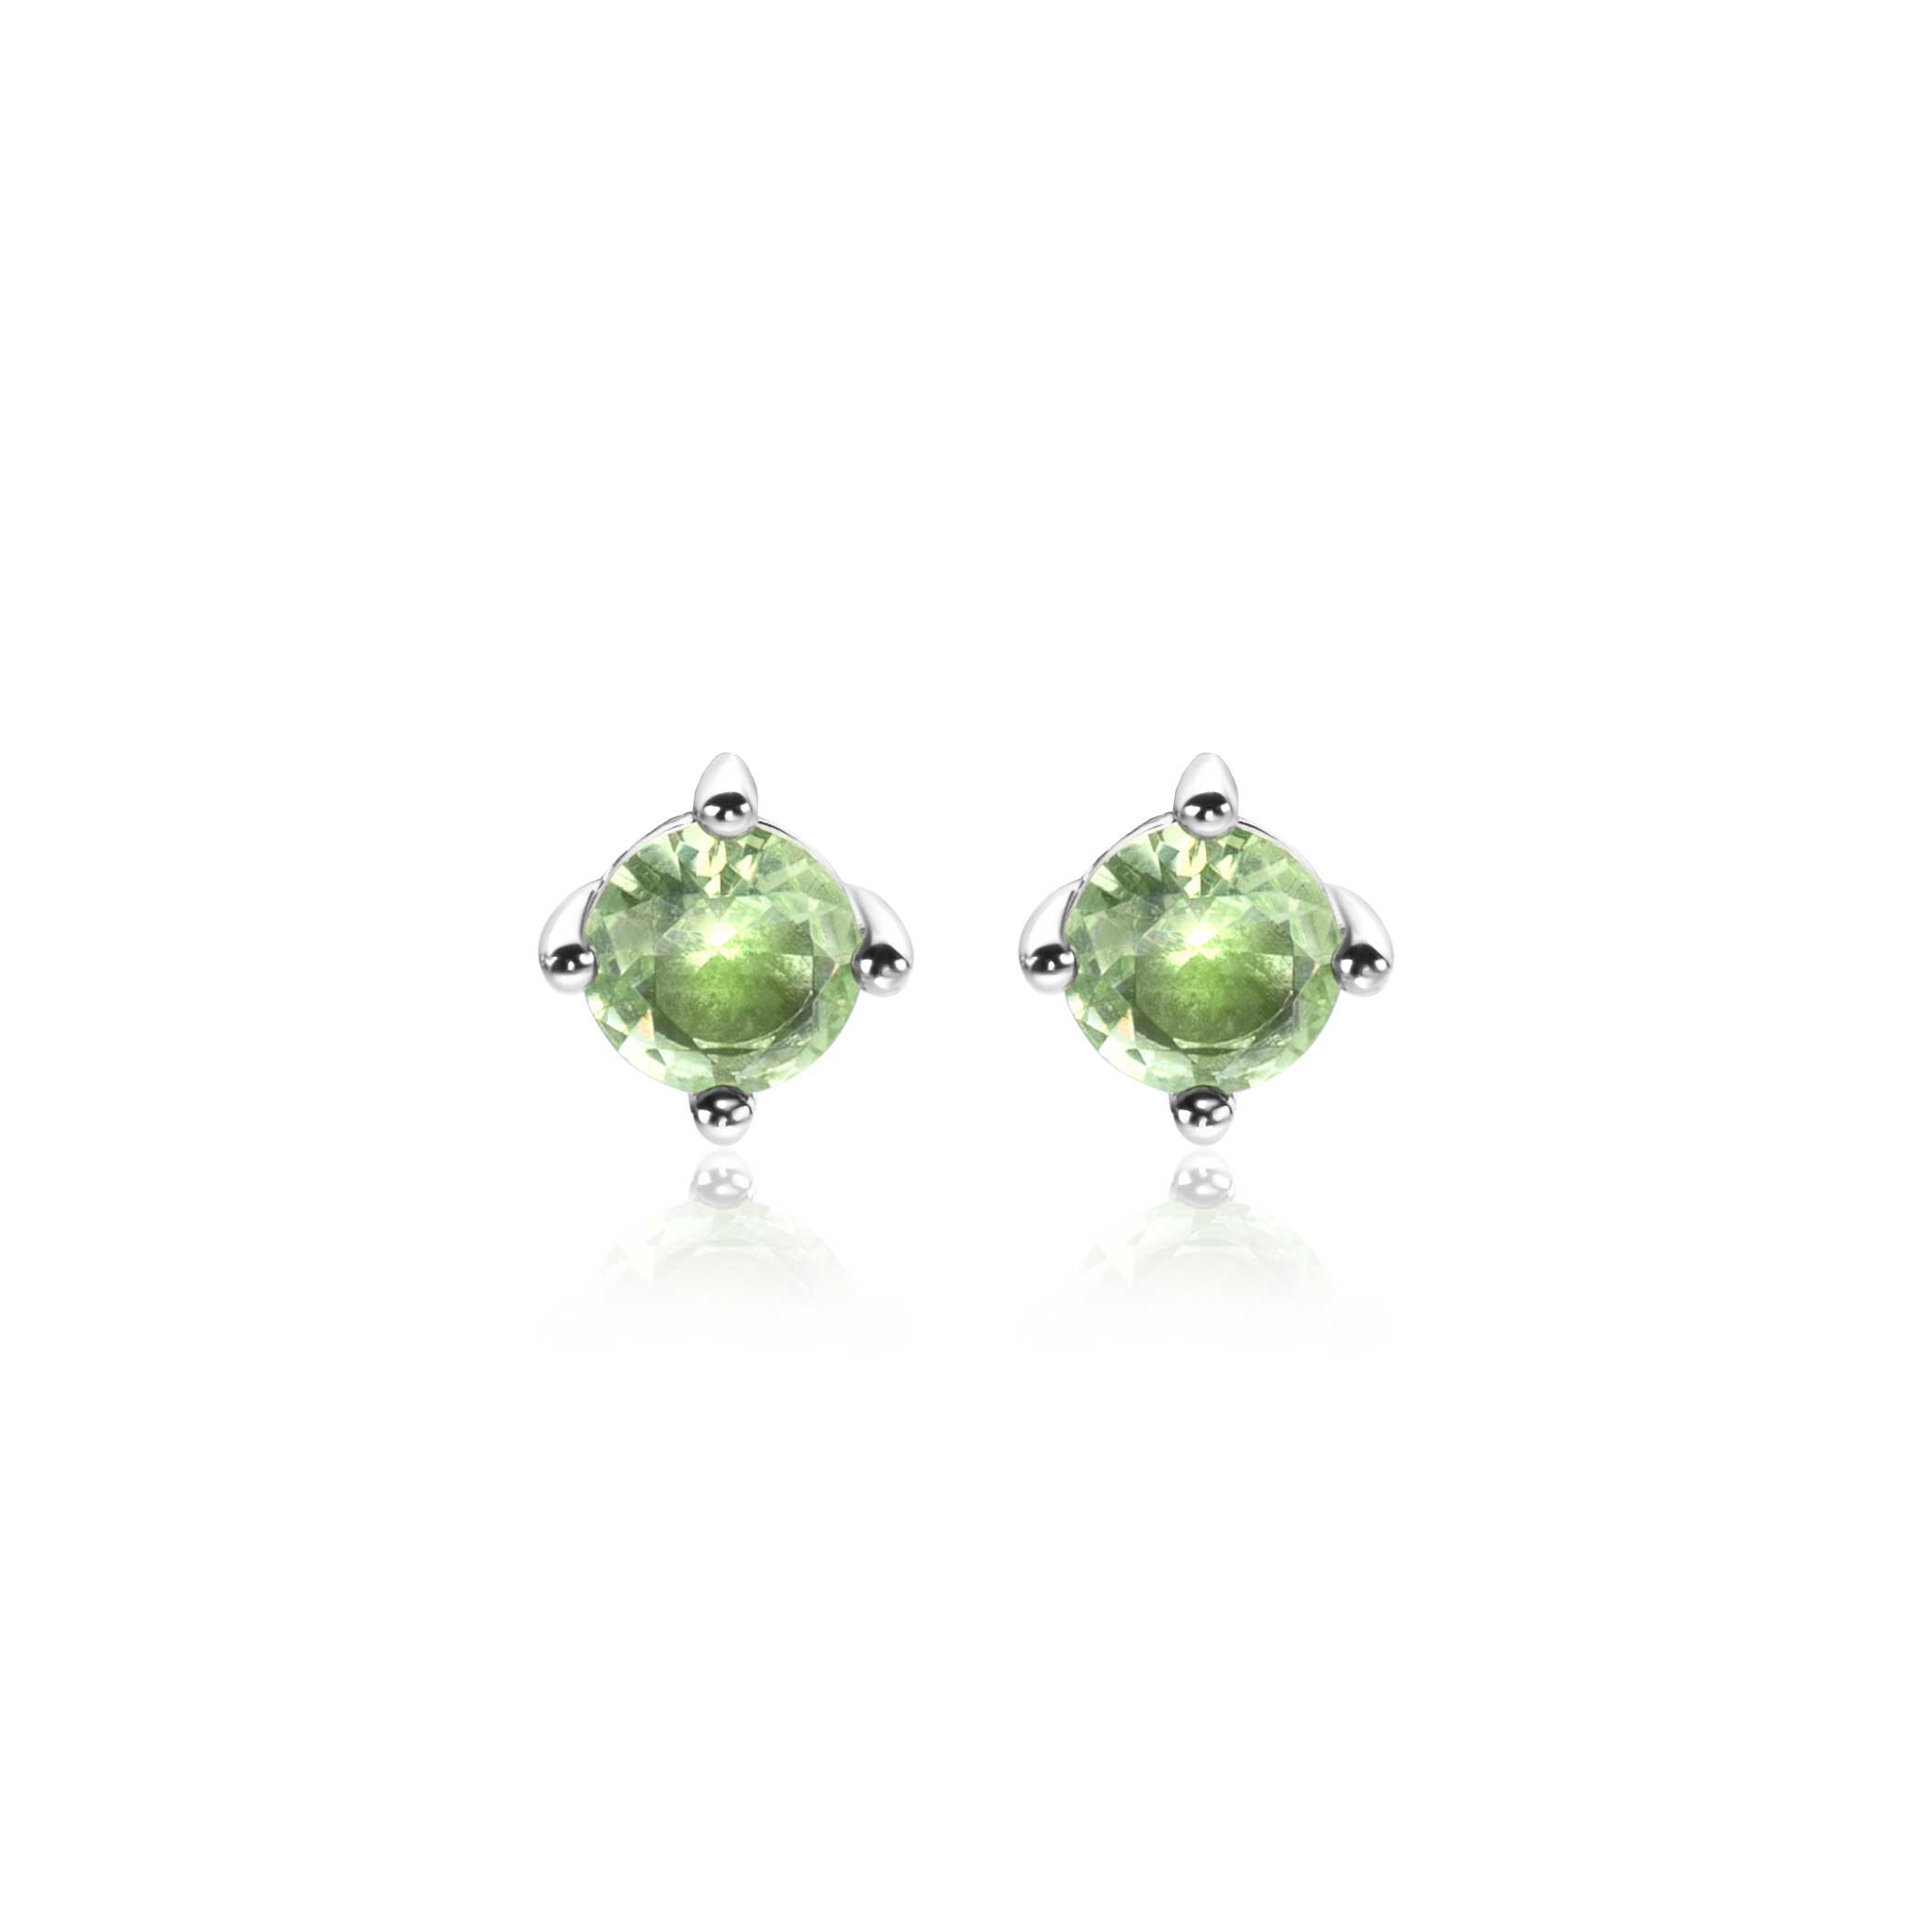 6mm ZINZI Sterling Silver Stud Earrings Prong Setting Light Green Color Stone ZIO1383G